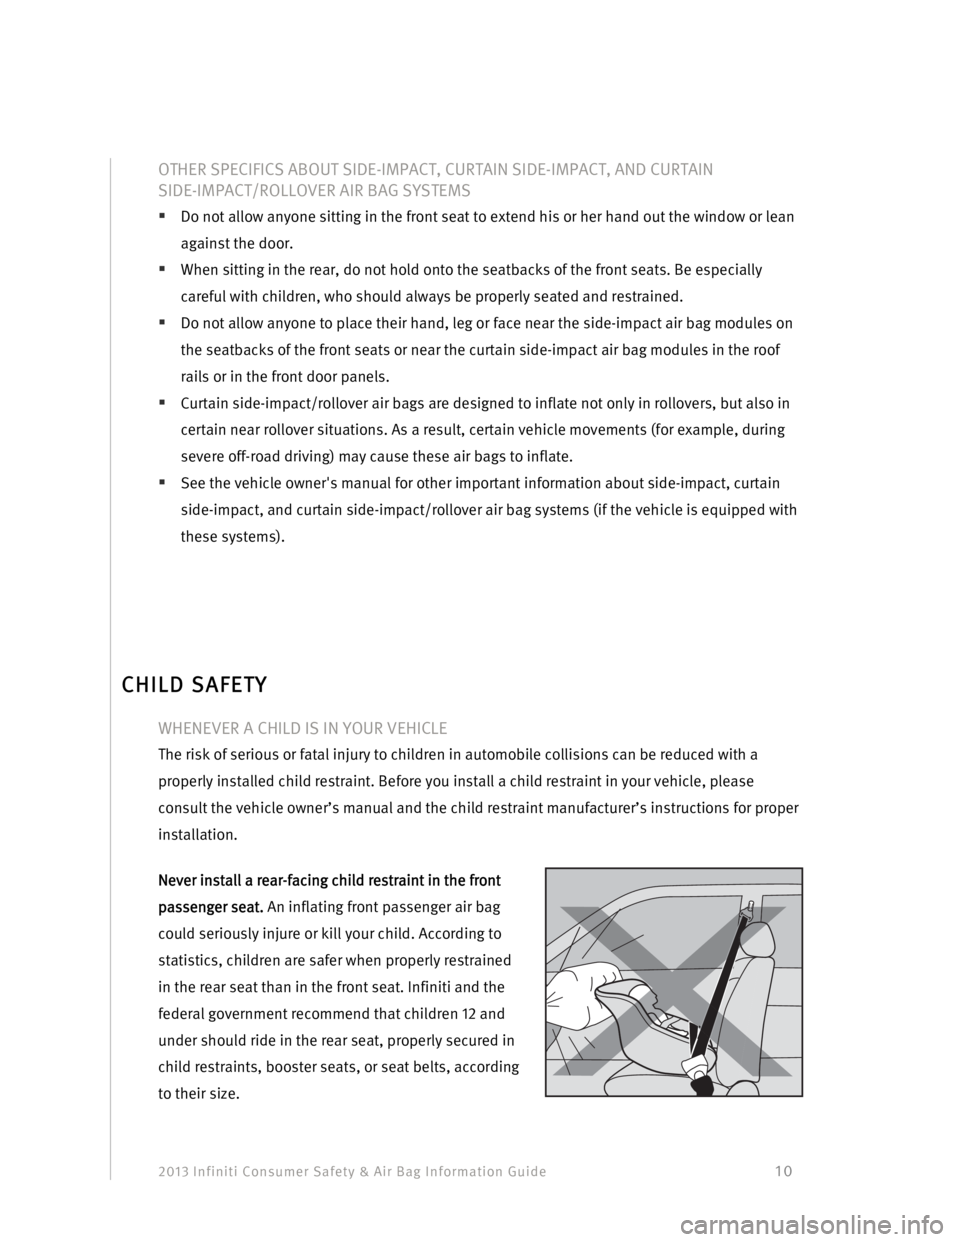 INFINITI FX 2013  Consumer Safety And Air Bag Information Guide 2013 Infiniti Consumer Safety & Air Bag Information Guide                                         10 
OTHER SPECIFICS ABOUT SIDE-IMPACT, CURTAIN SIDE-IMPACT, AND CURTAIN  
SIDE-IMPACT/ROLLOVER AIR BAG